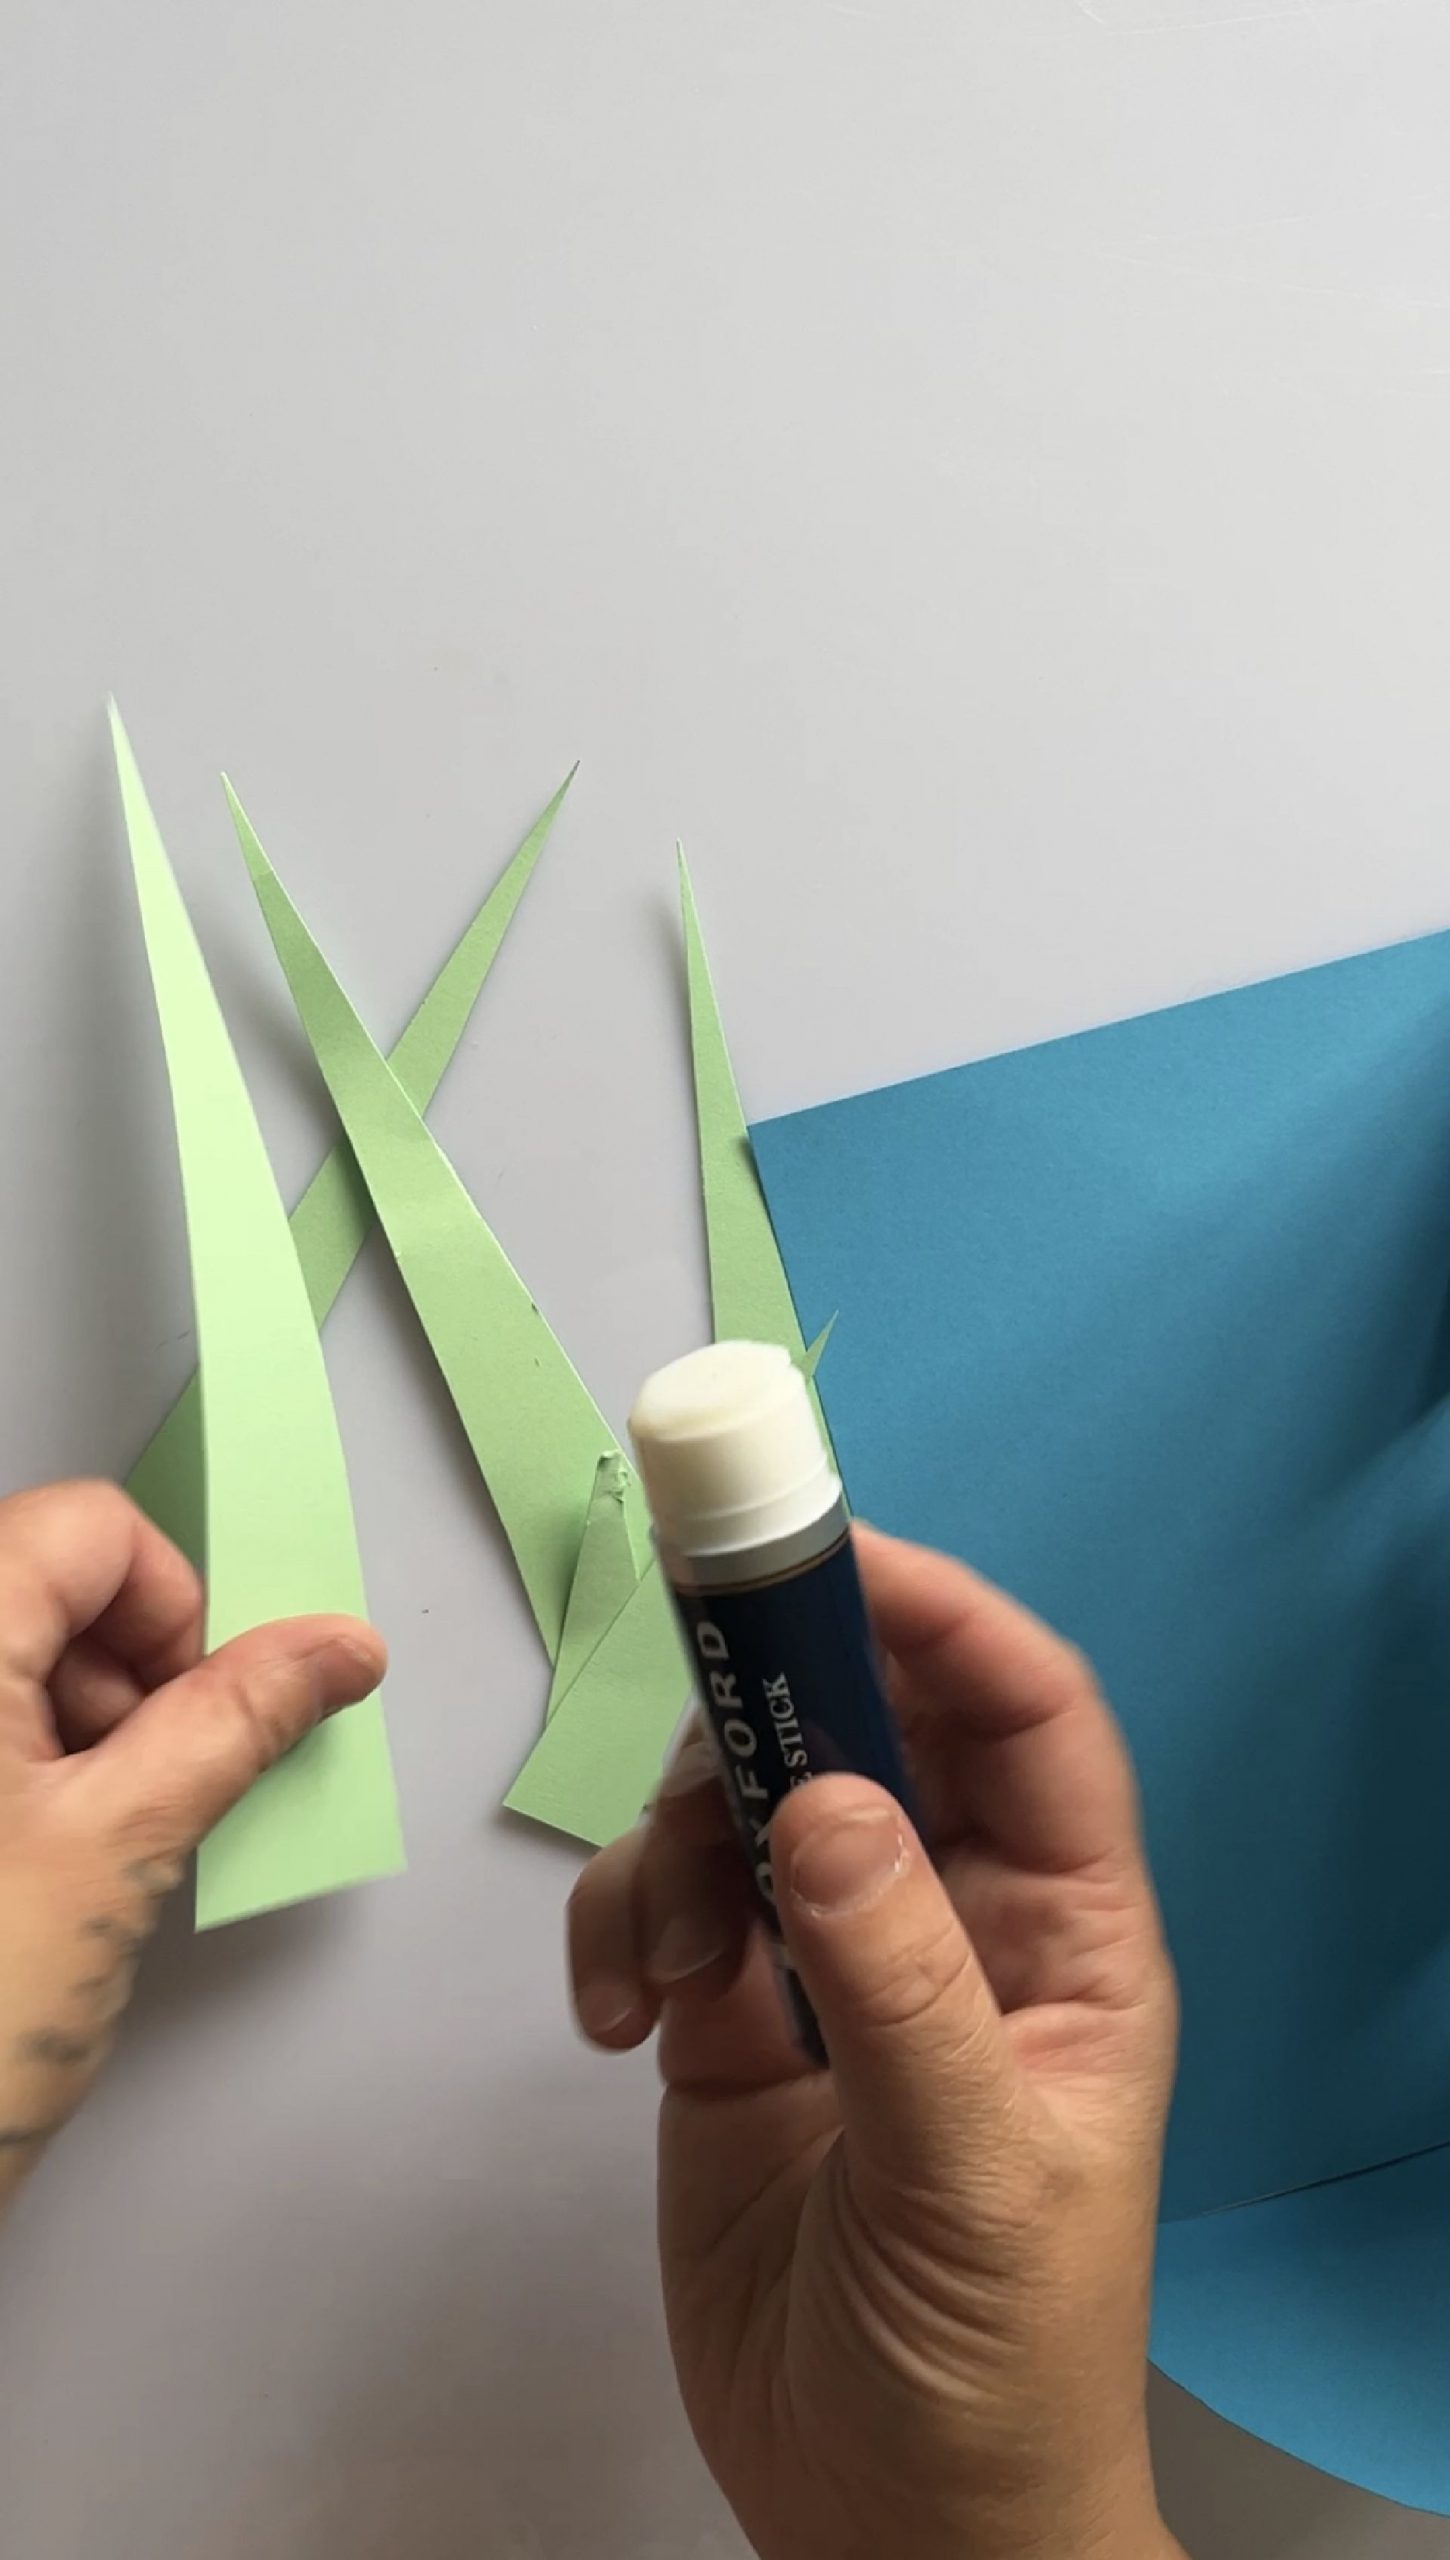 Some strips of green paper and a glue stick